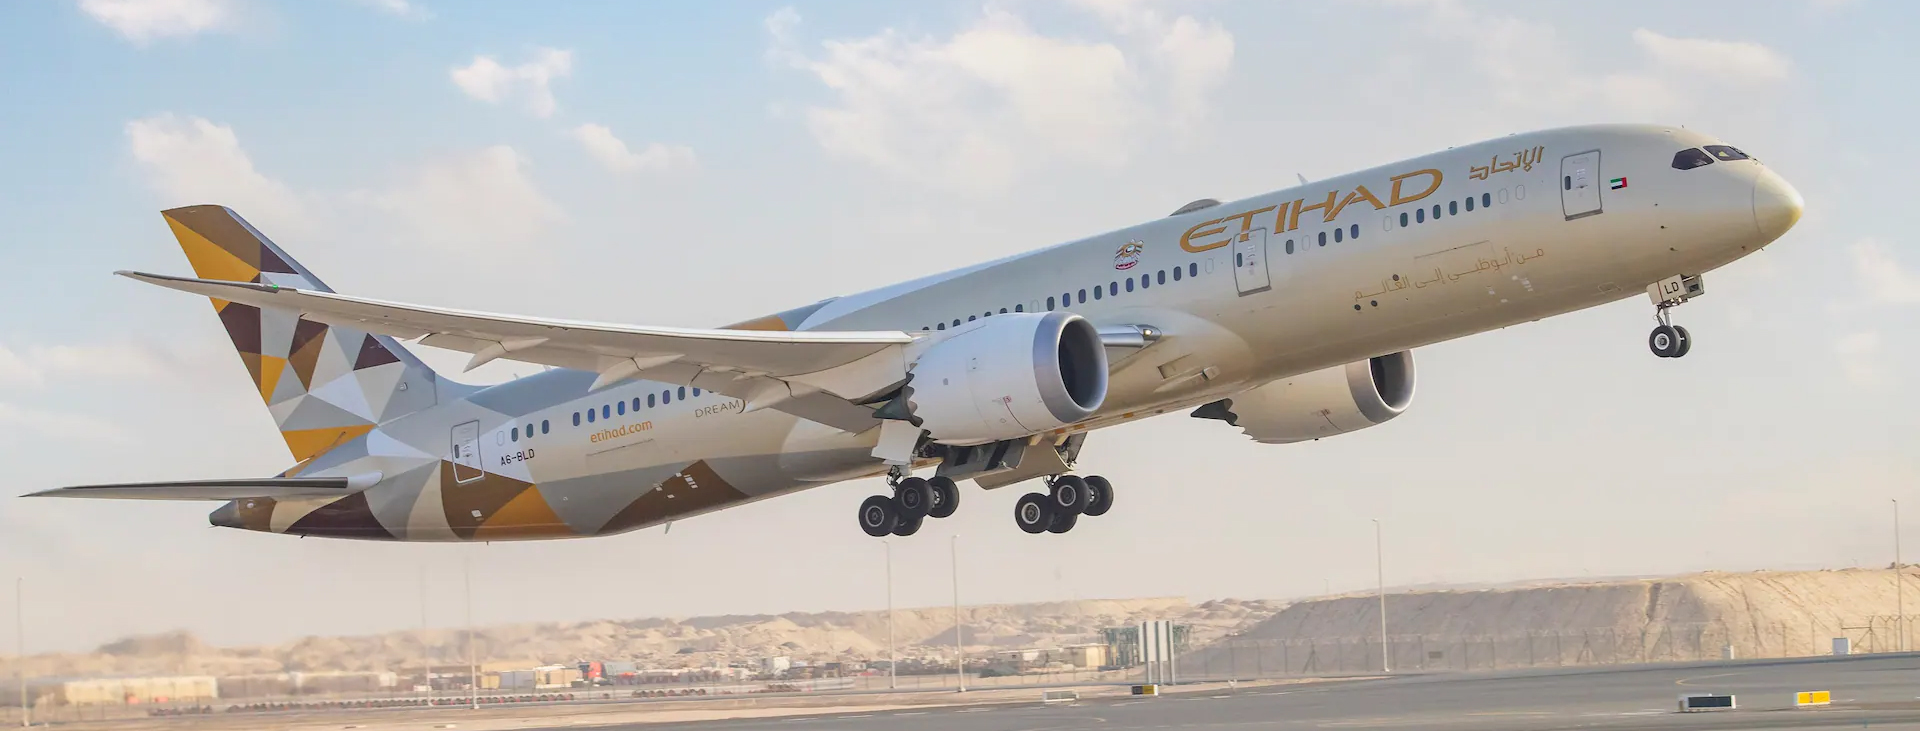 Etihad Airways announces new route to Osaka, Japan. MTB Events. Image shows Etihad branded boeing 787-9 taking off in a sunset